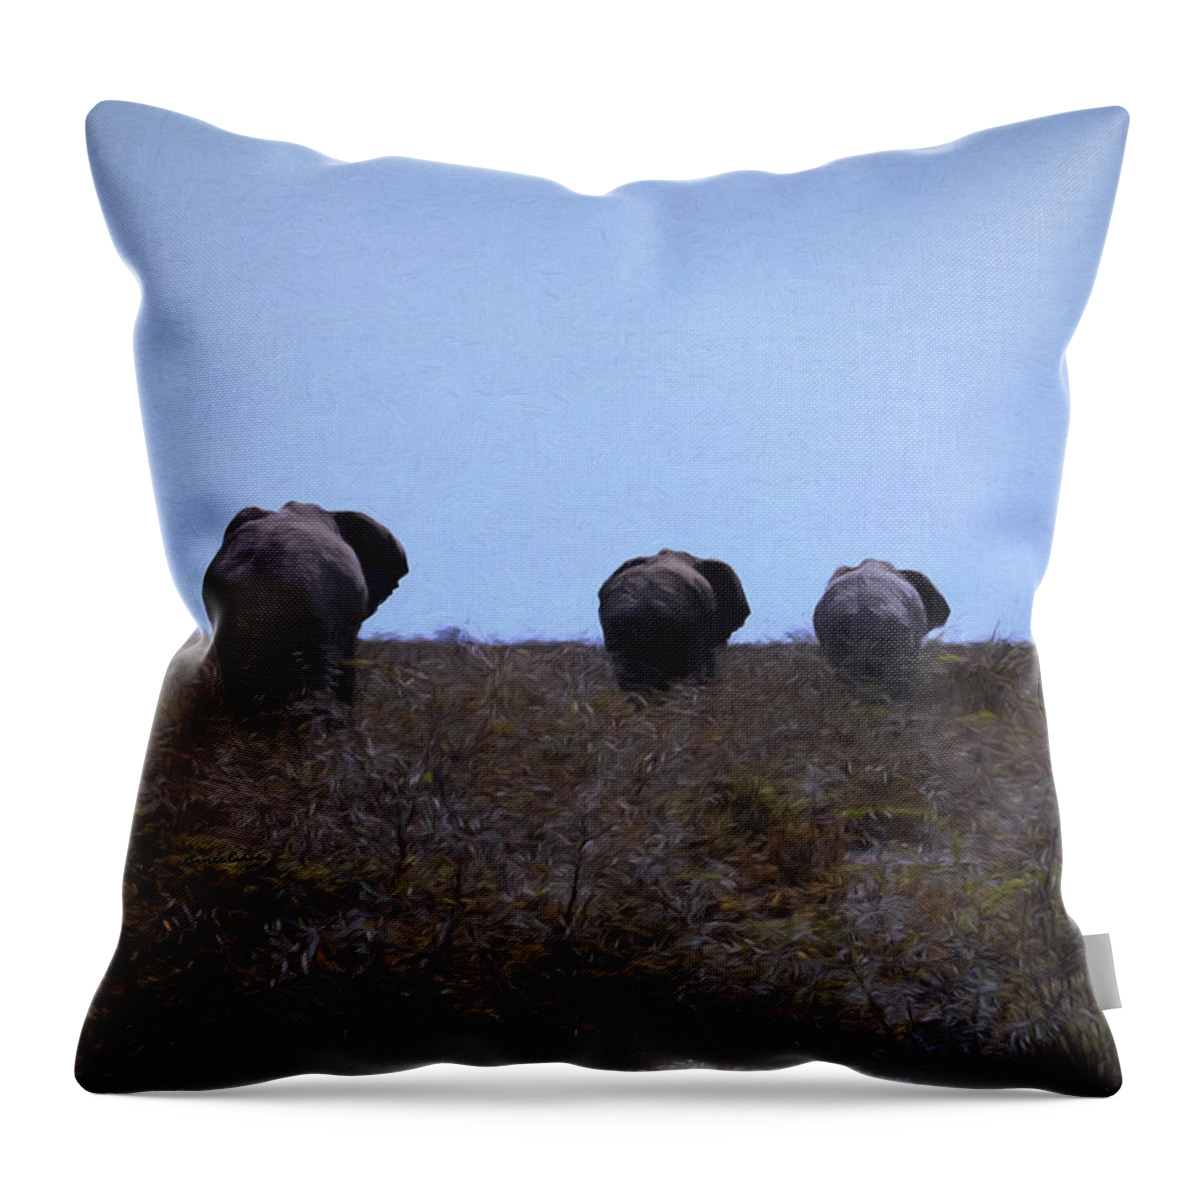 Elephant Throw Pillow featuring the digital art The End by Ernest Echols